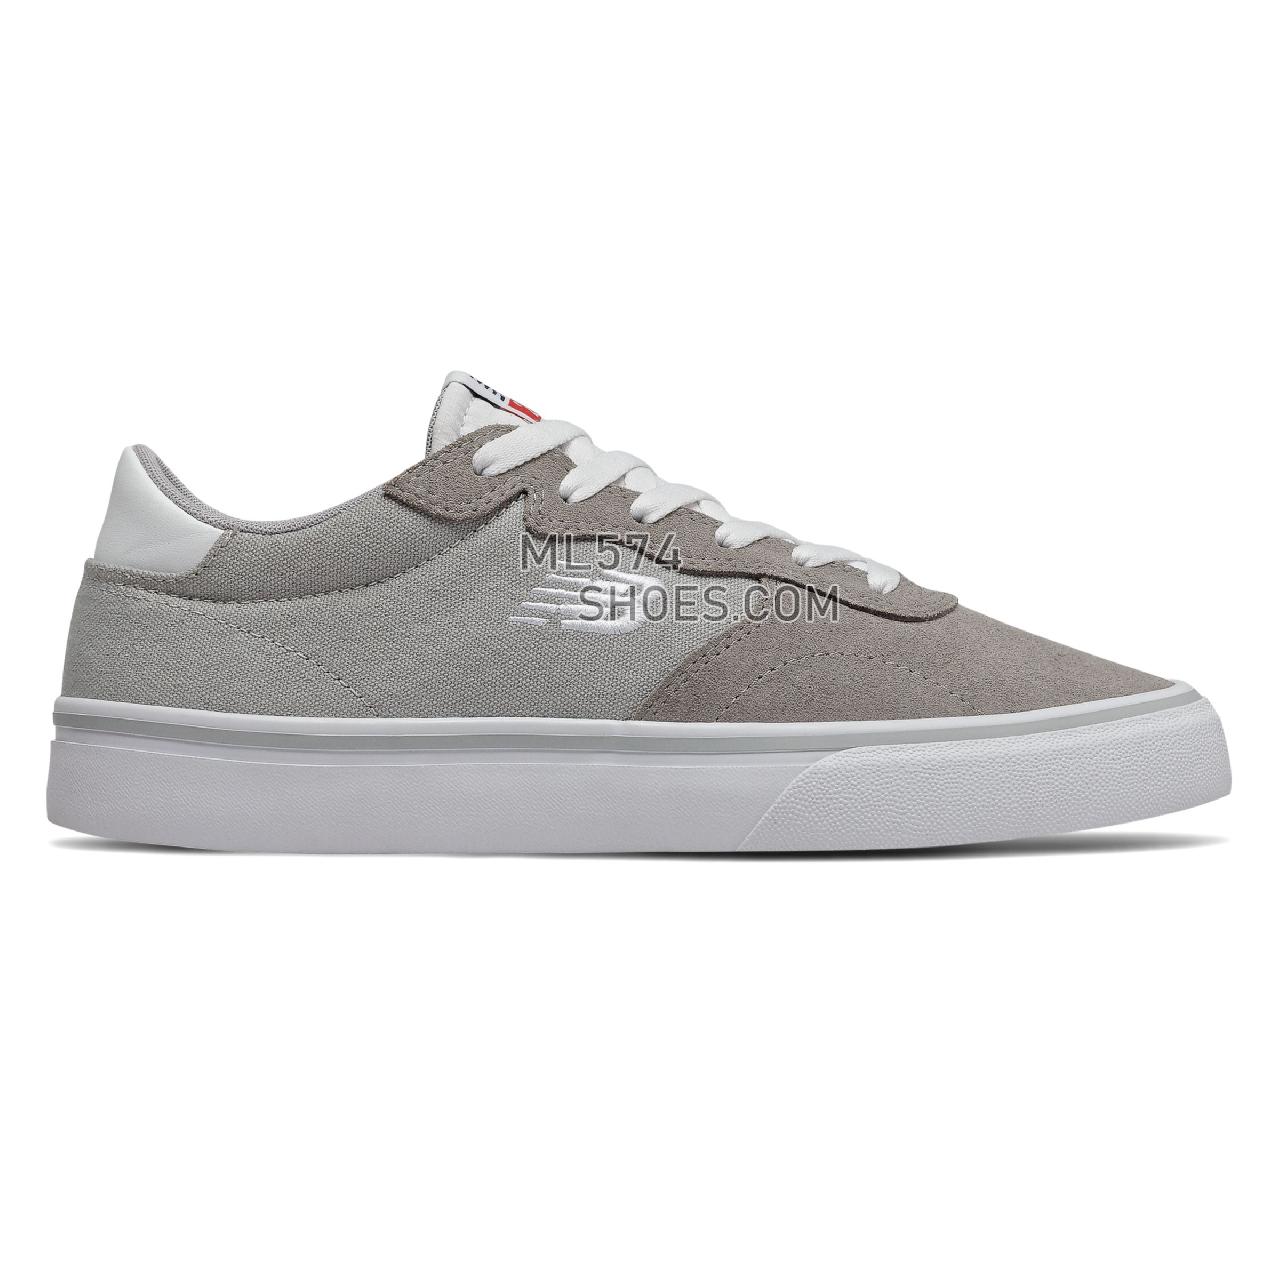 New Balance All Coasts 232 - Men's Court Classics - Grey with White - AM232GYW